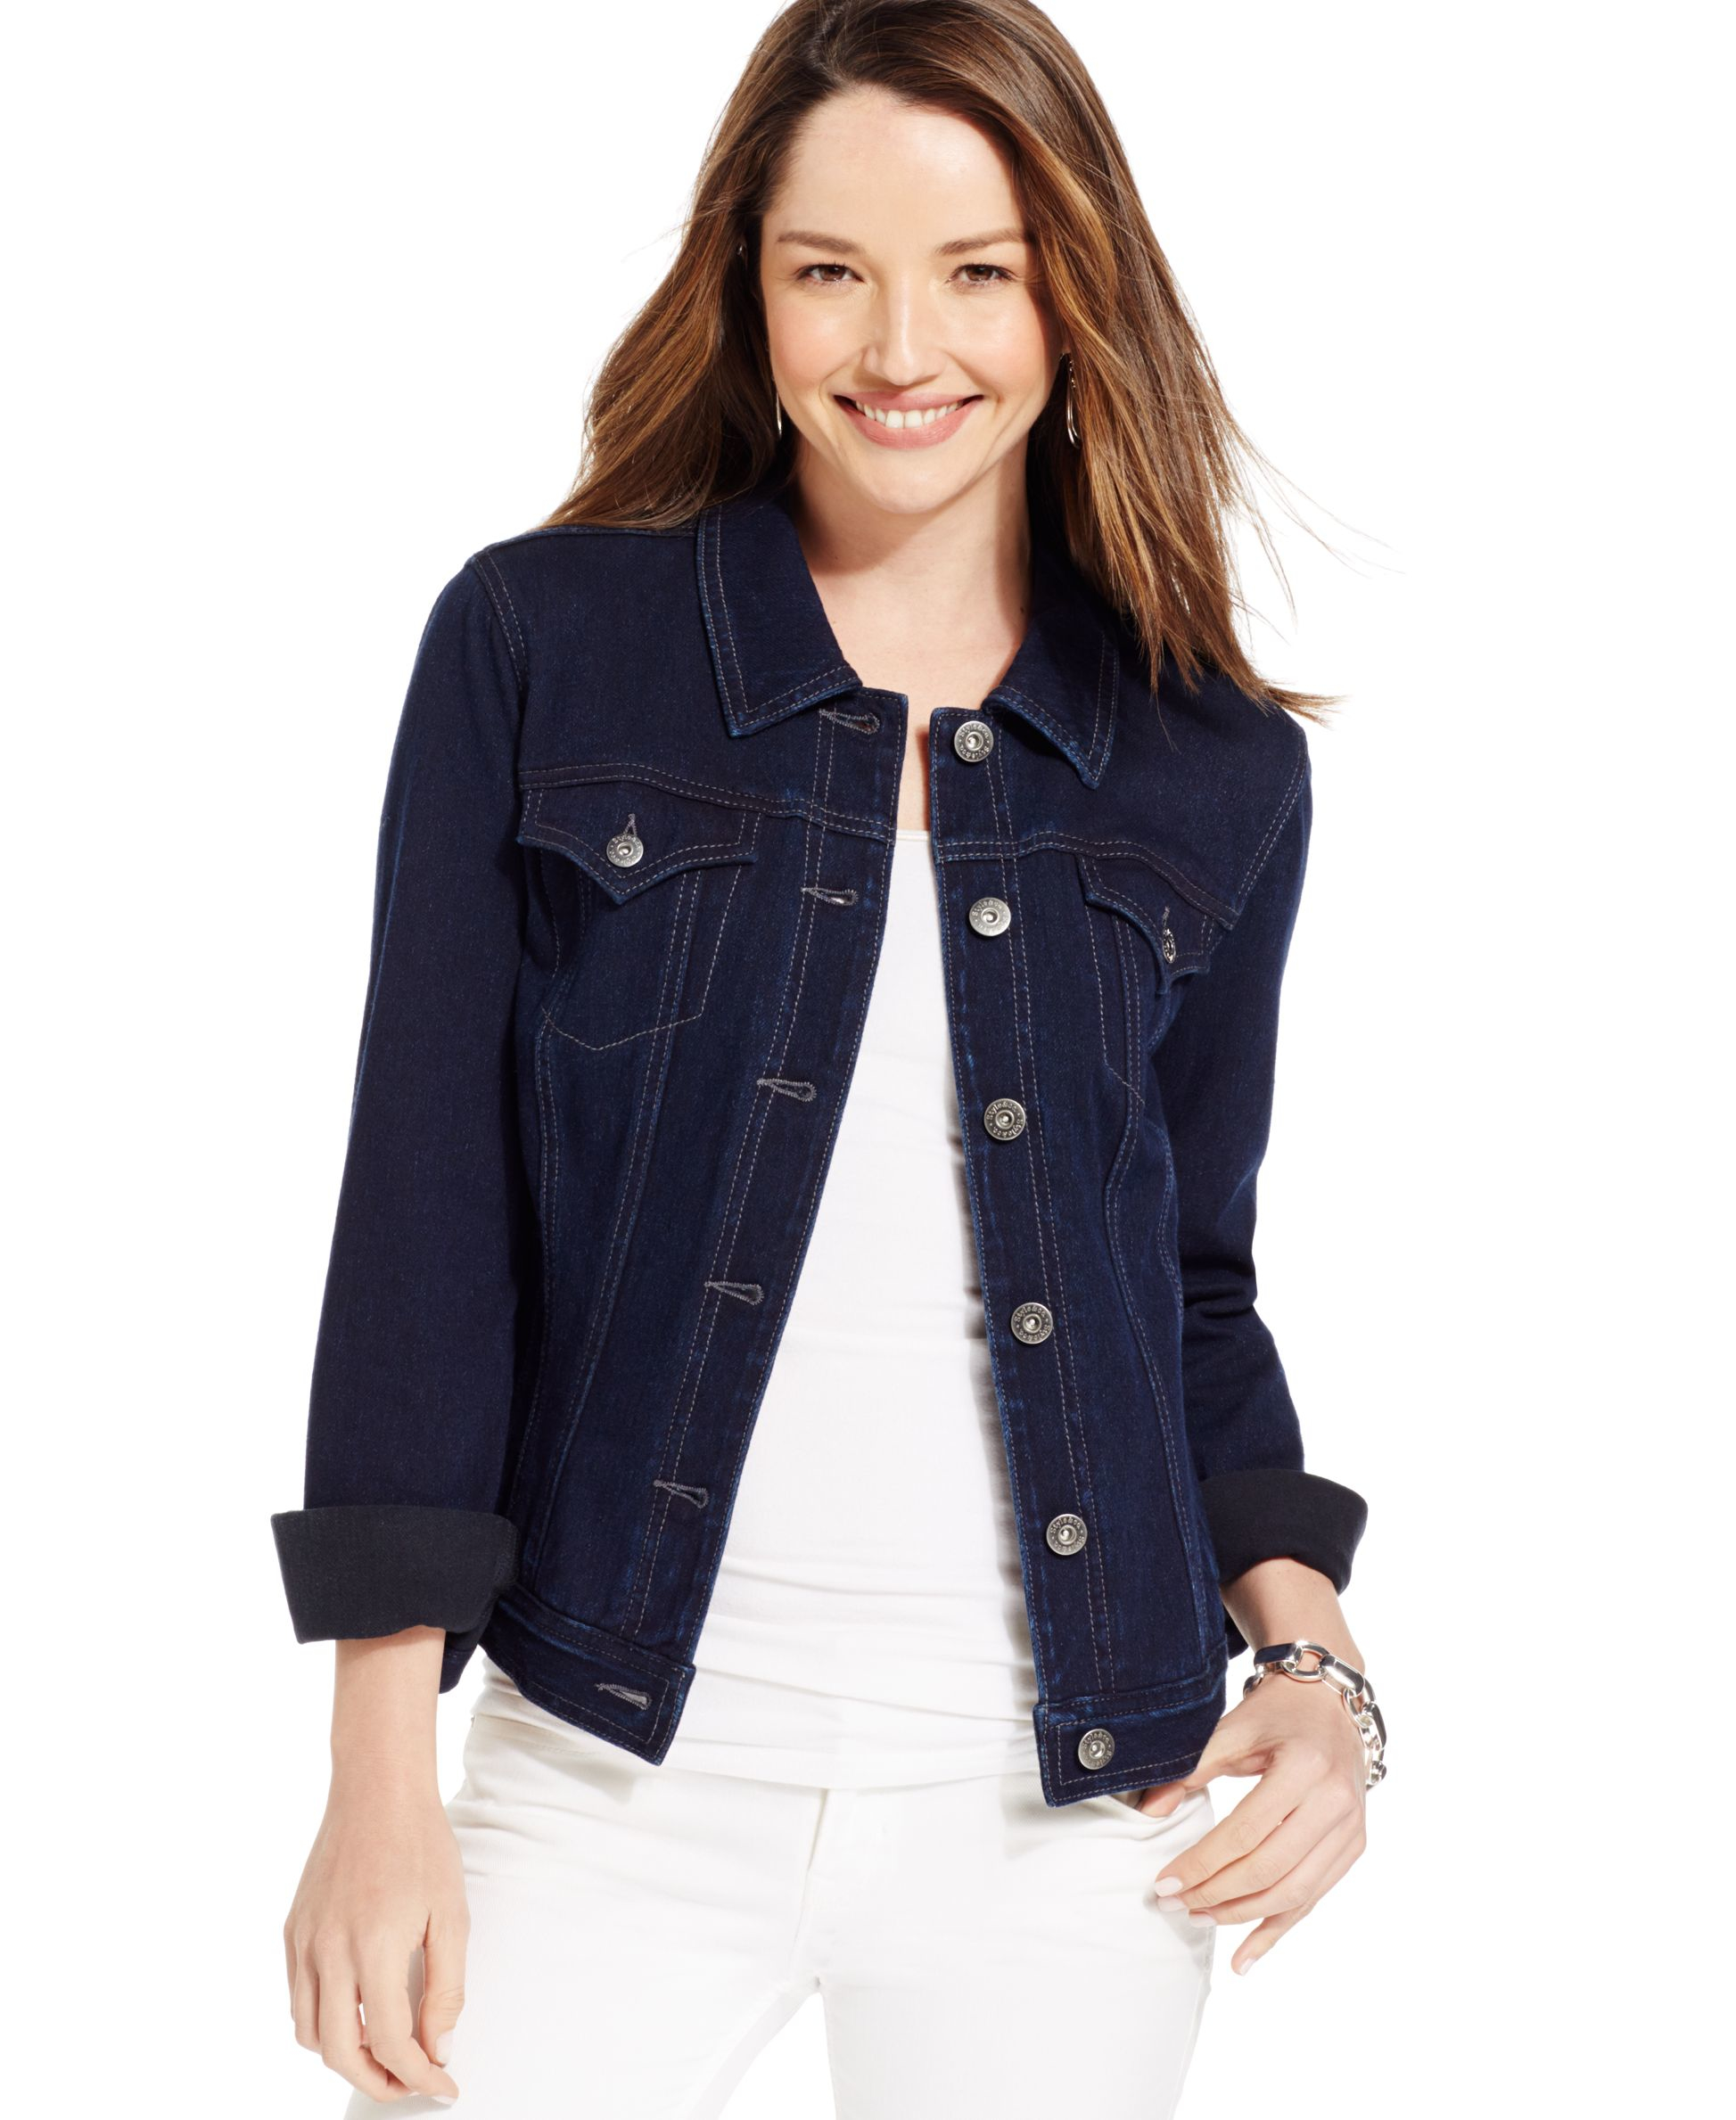 Lyst - Style & Co. Petite Denim Jacket, Rinse Wash, Only At Macy's in Blue